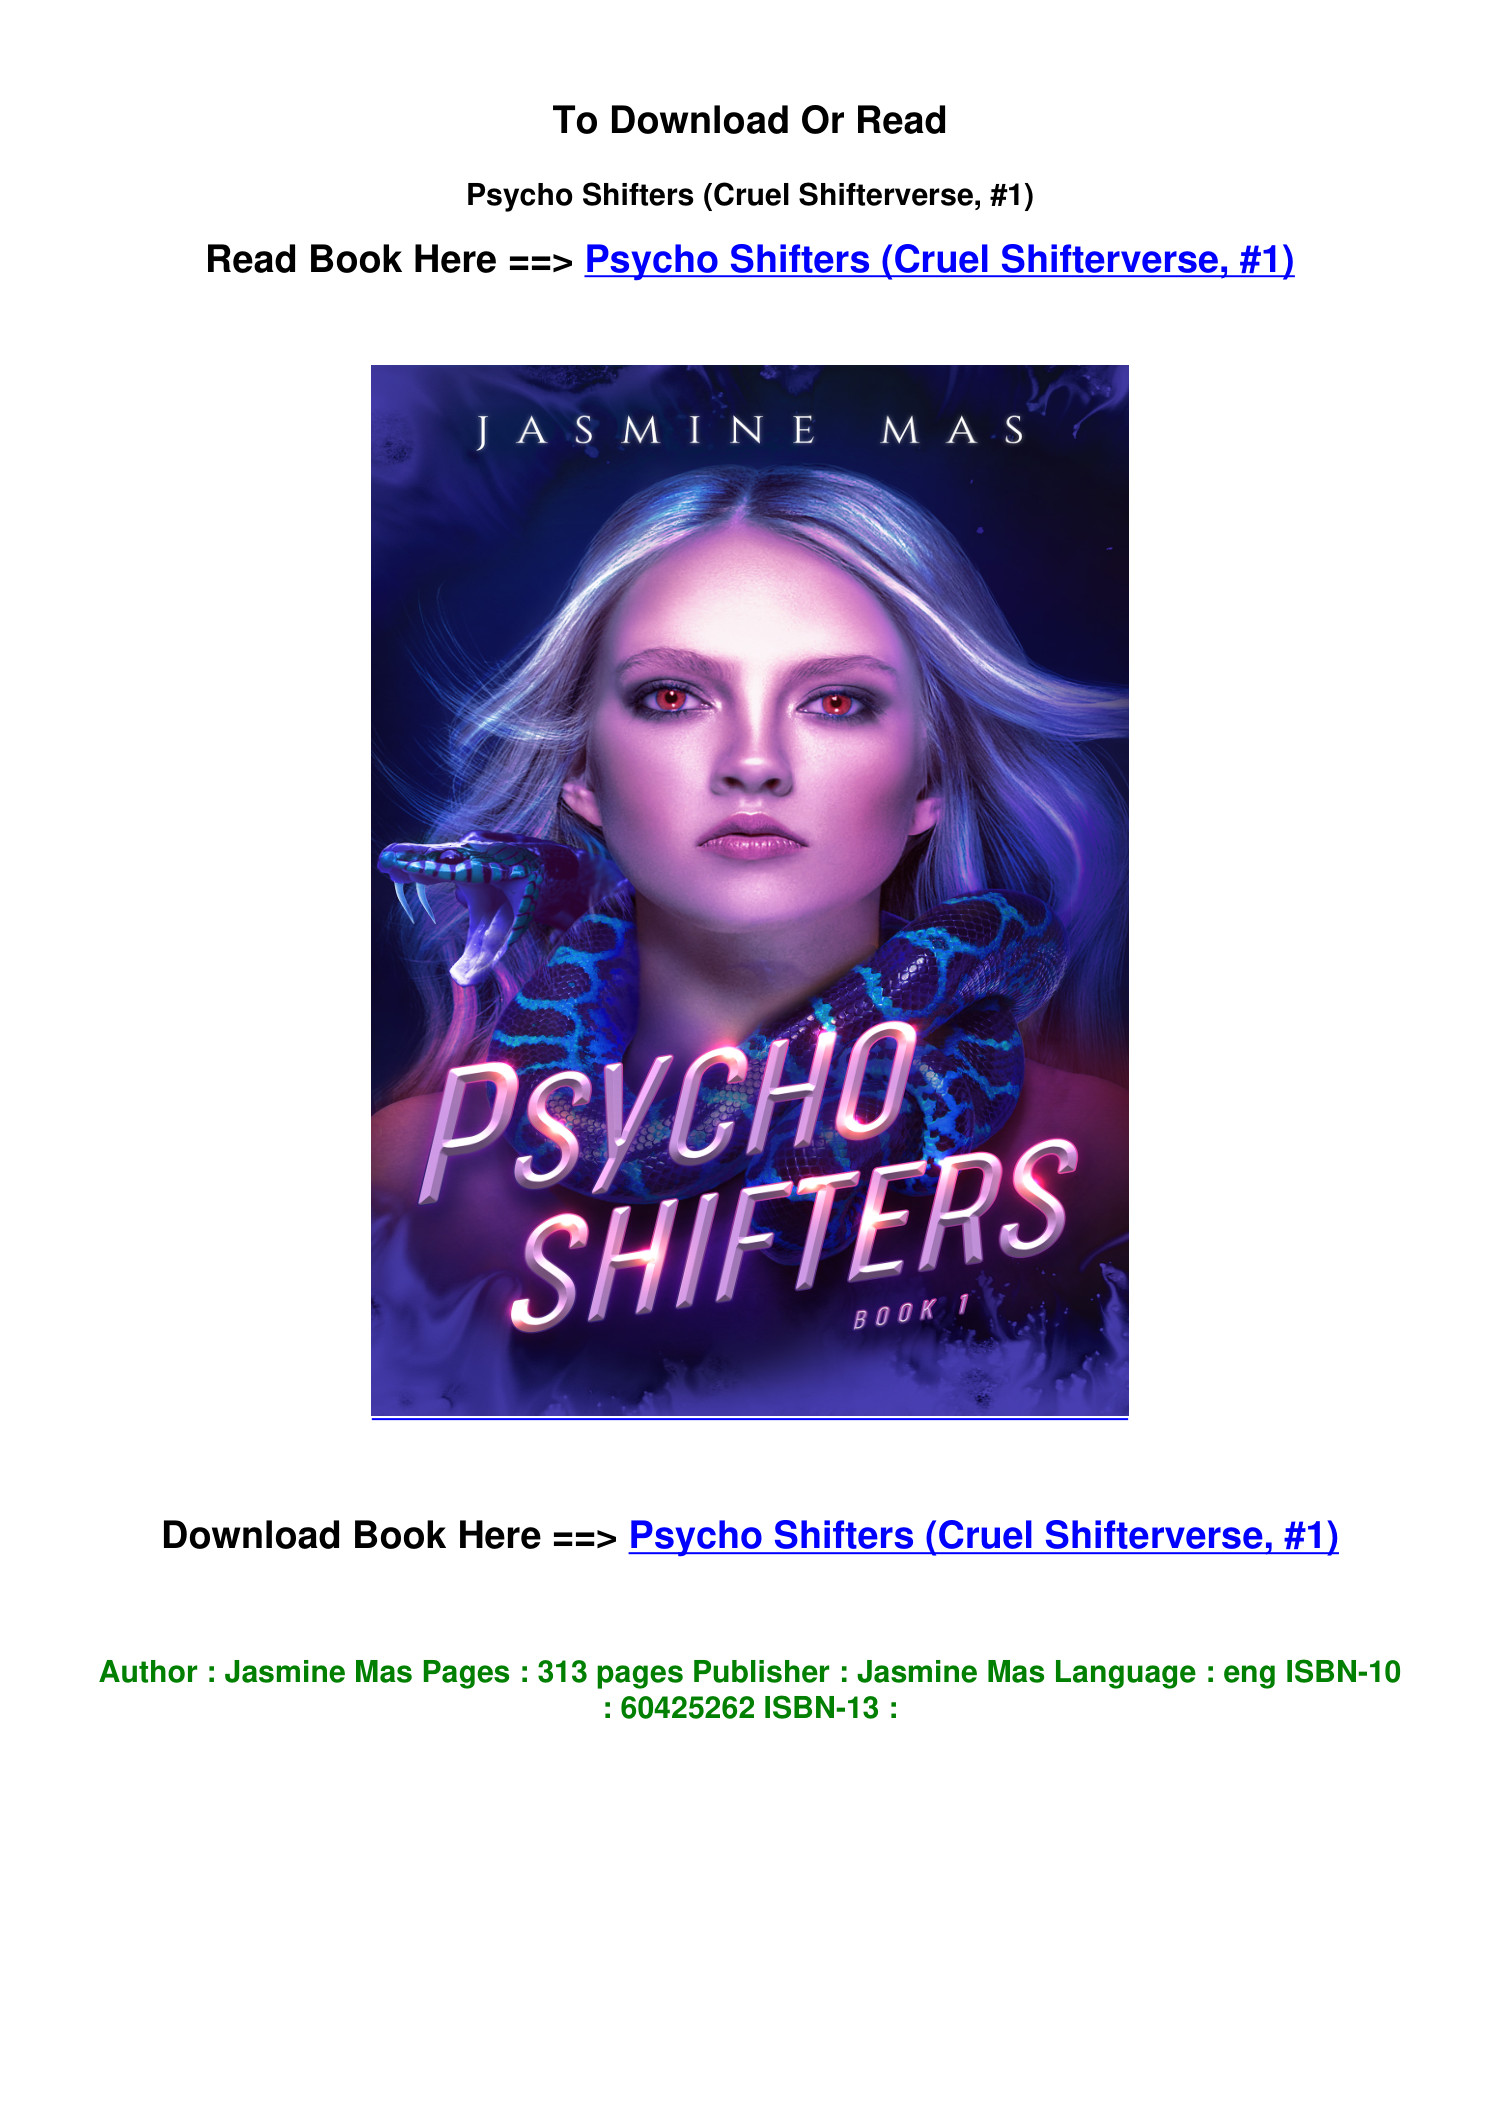 Jasmine Mas - Psycho Shifters is out now in Paperback! T-minus 9